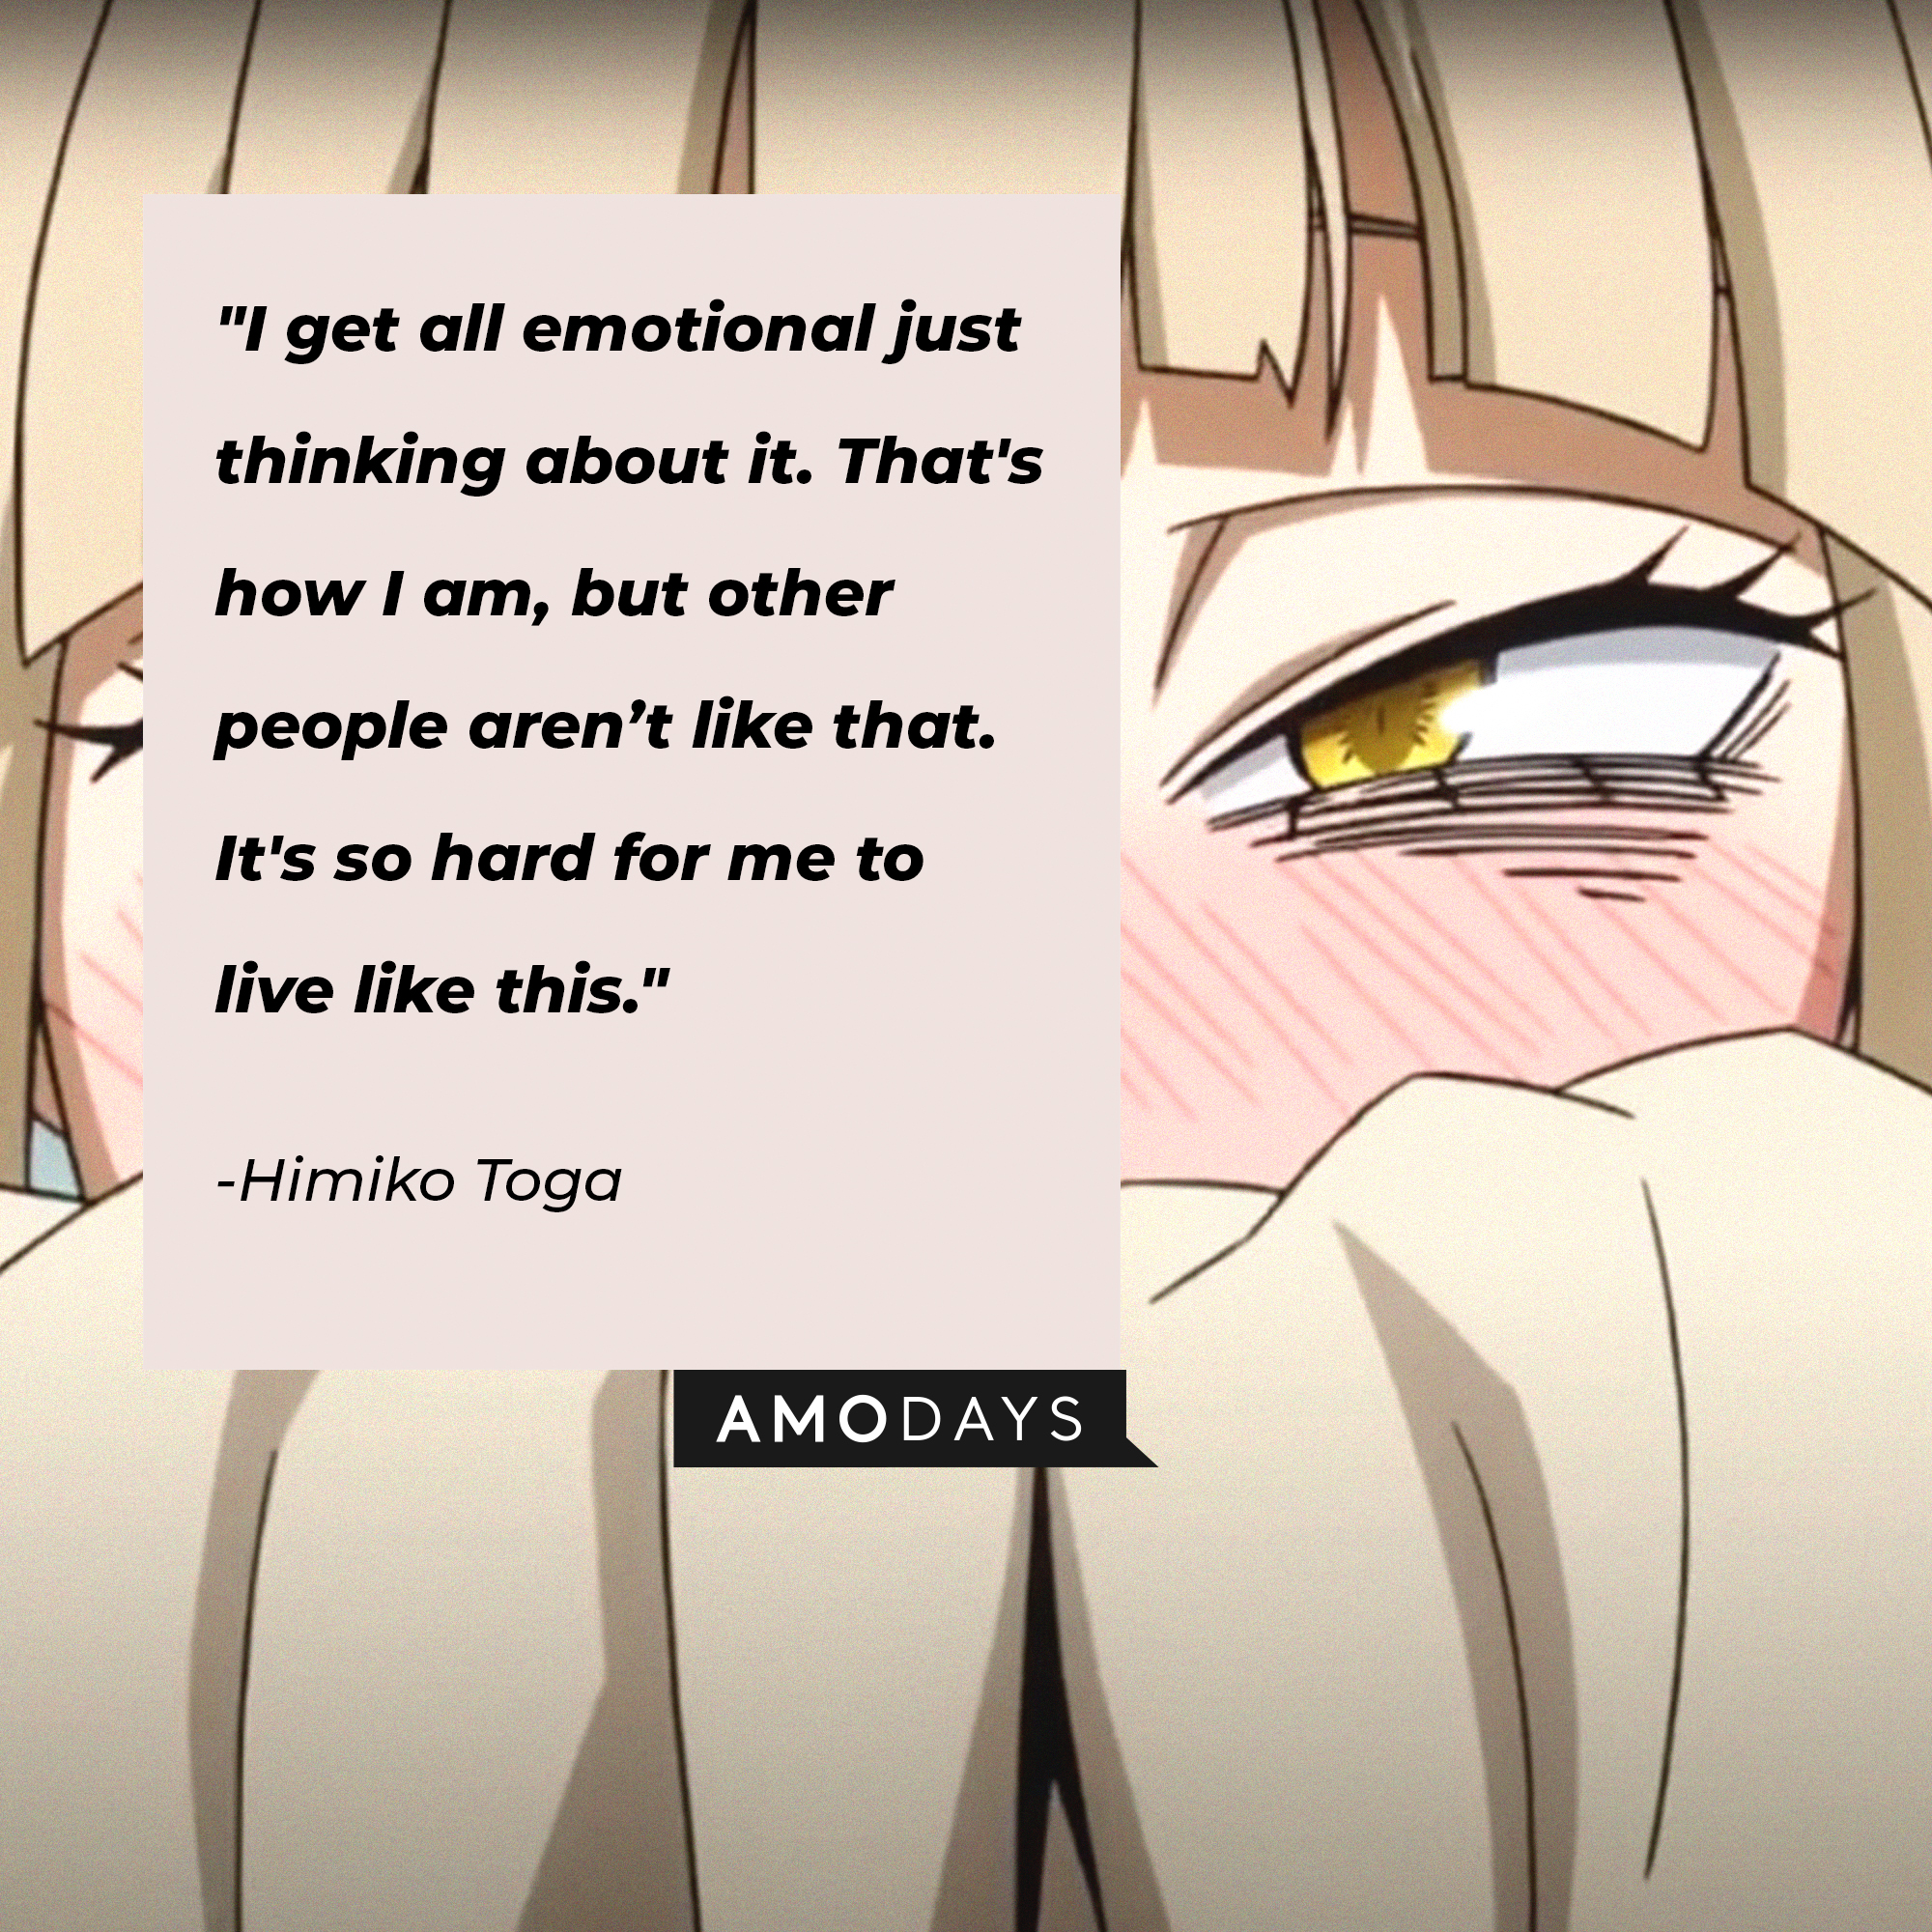 Himiko Toga’s quote: "I get all emotional just thinking about it. That's how I am, but other people aren't like that. It's so hard for me to live like this." | Image: AmoDays